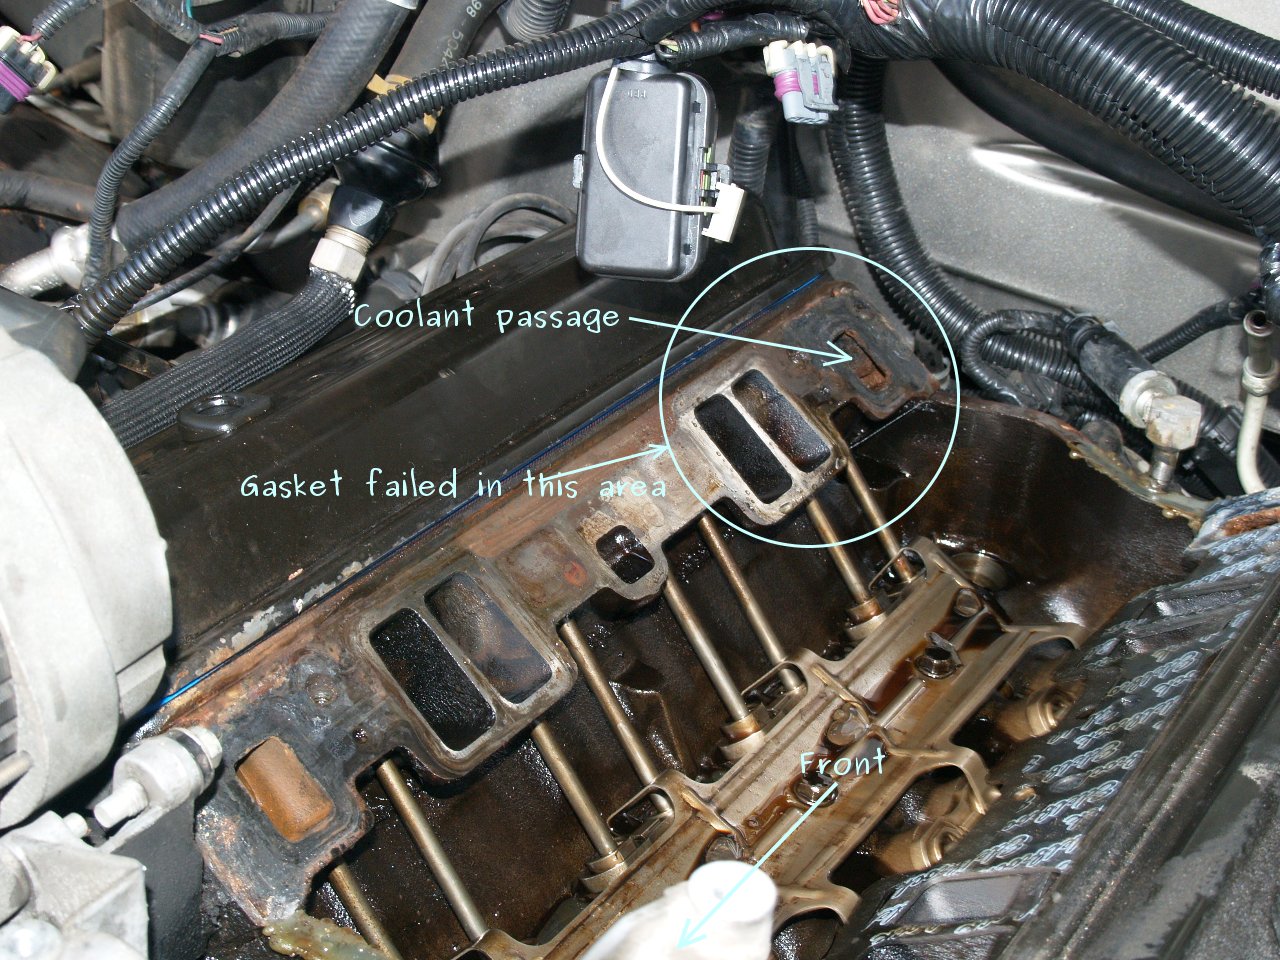 See P0BF5 in engine